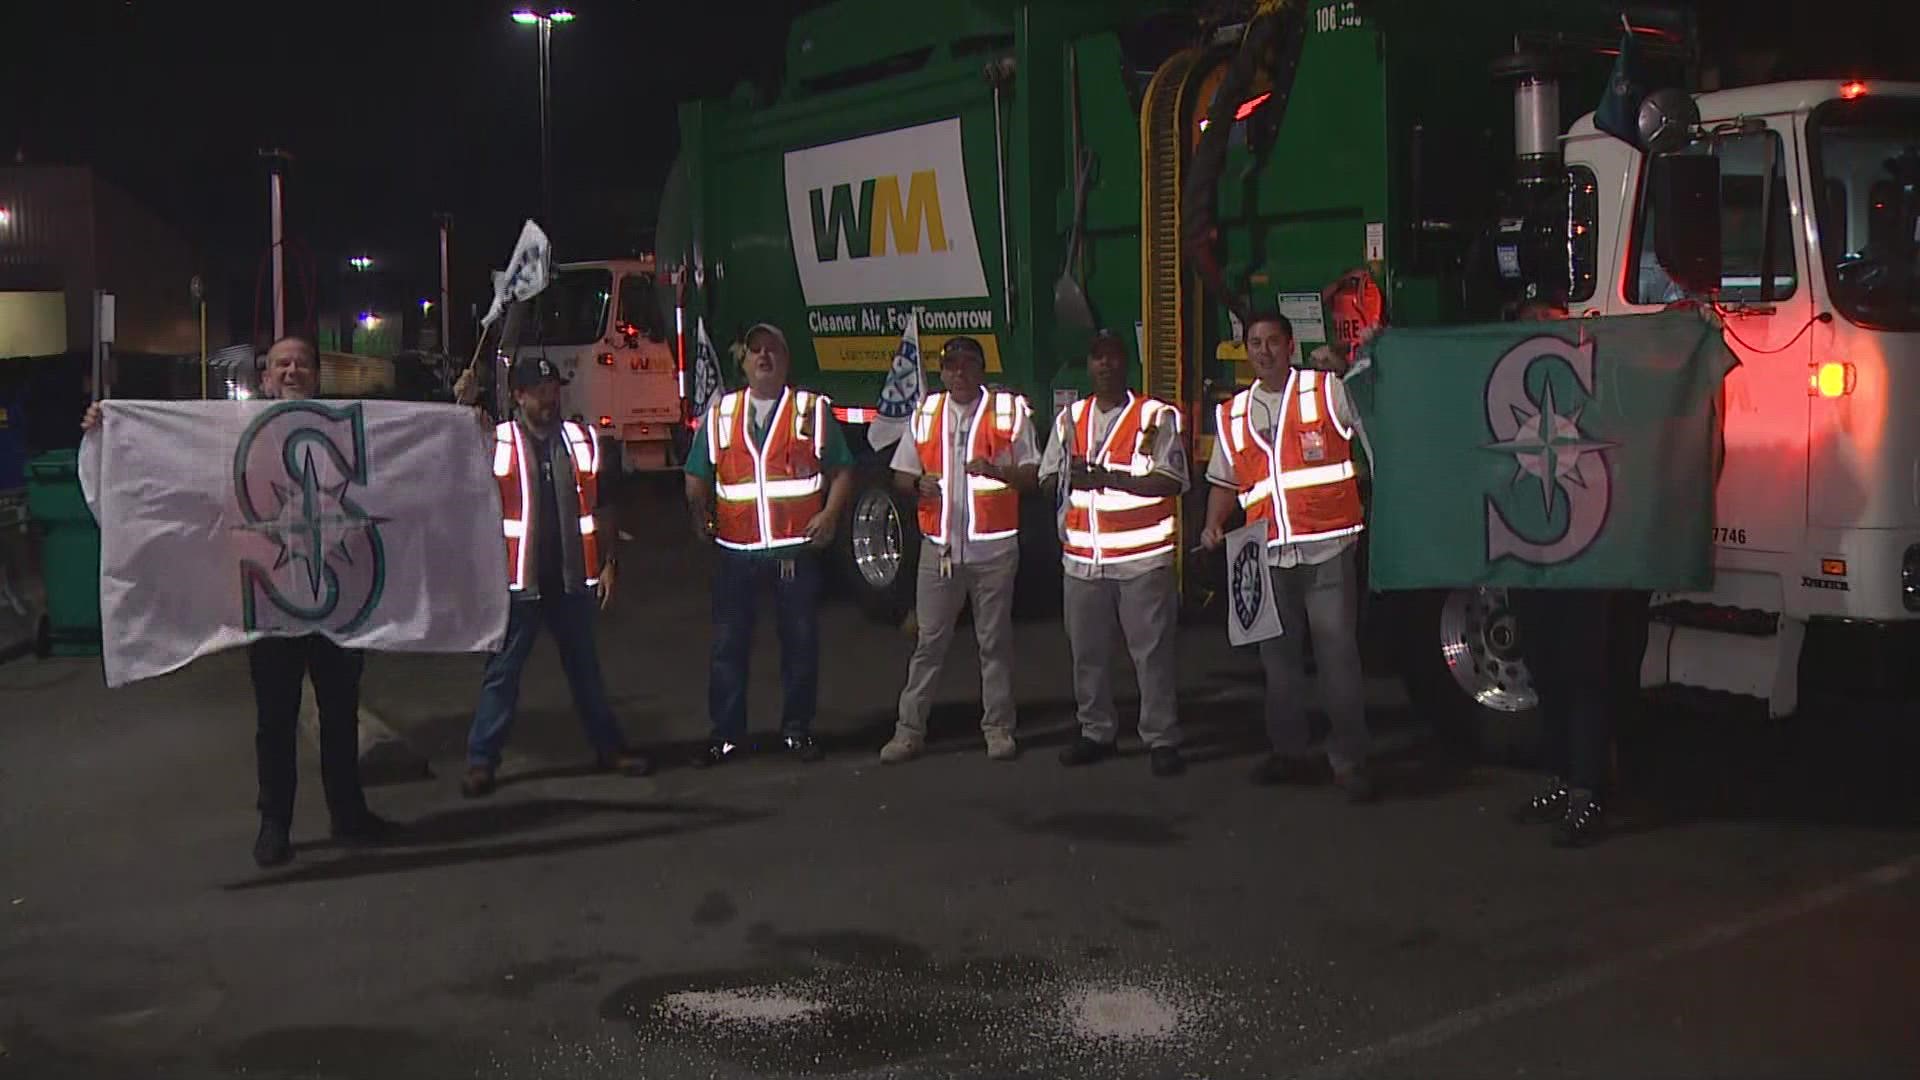 Seattle's Waste Management drivers got their morning started with a Mariners Mania Rally ahead of this weekend's playoffs